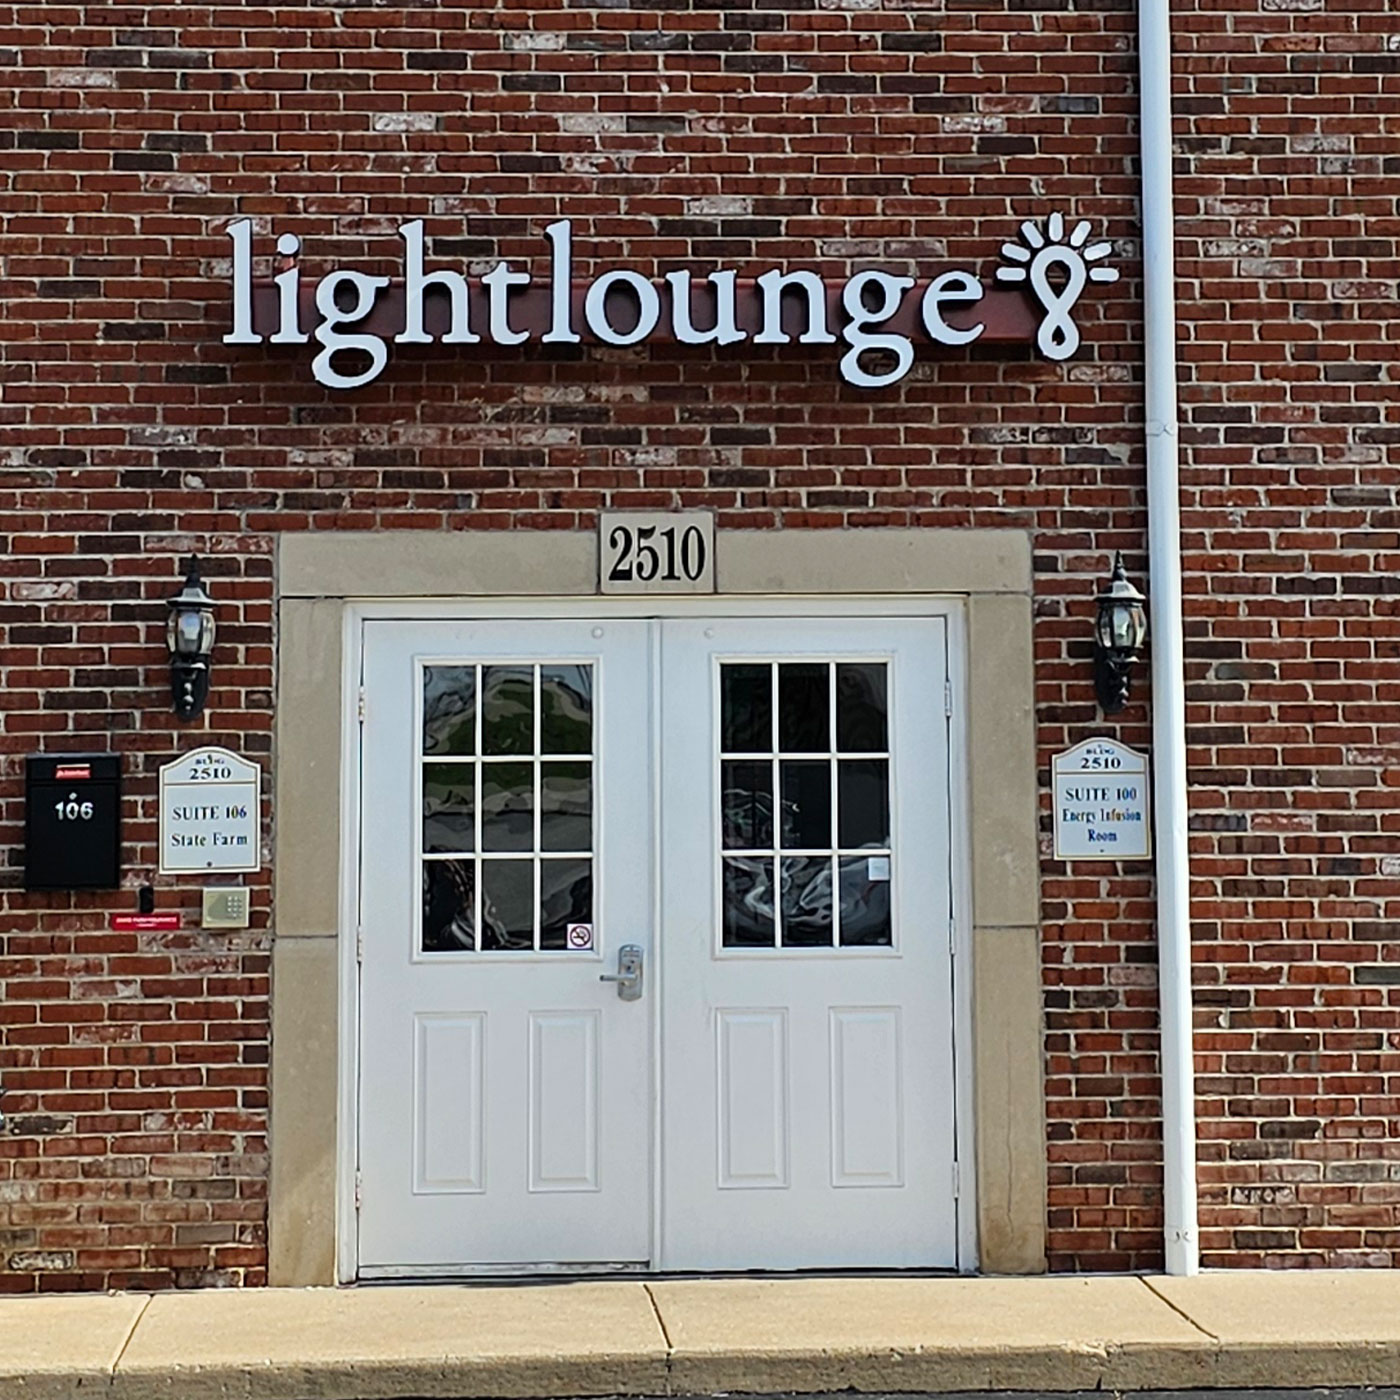 Light Lounge St. Charles, MO store front.